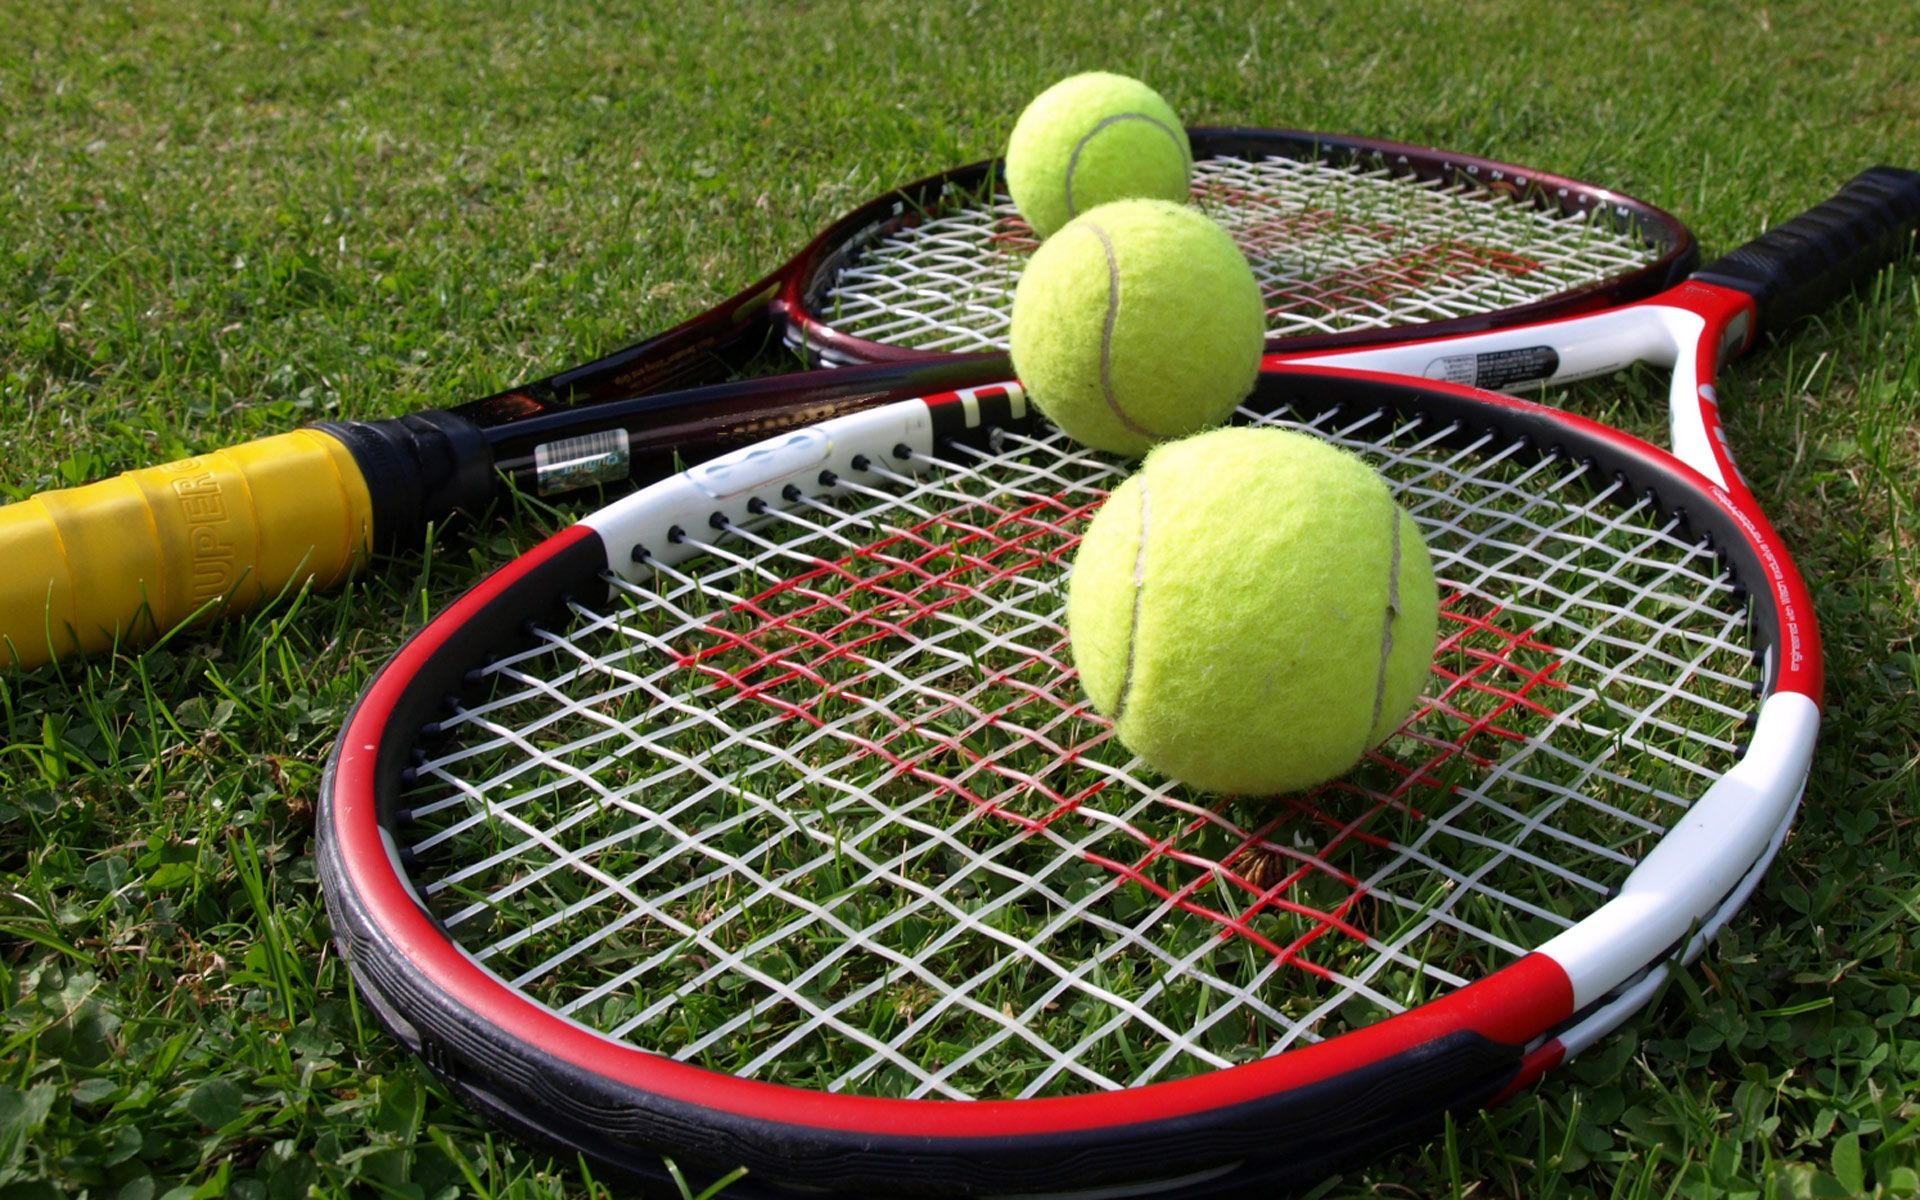 tennis racket and balls kept on the ground